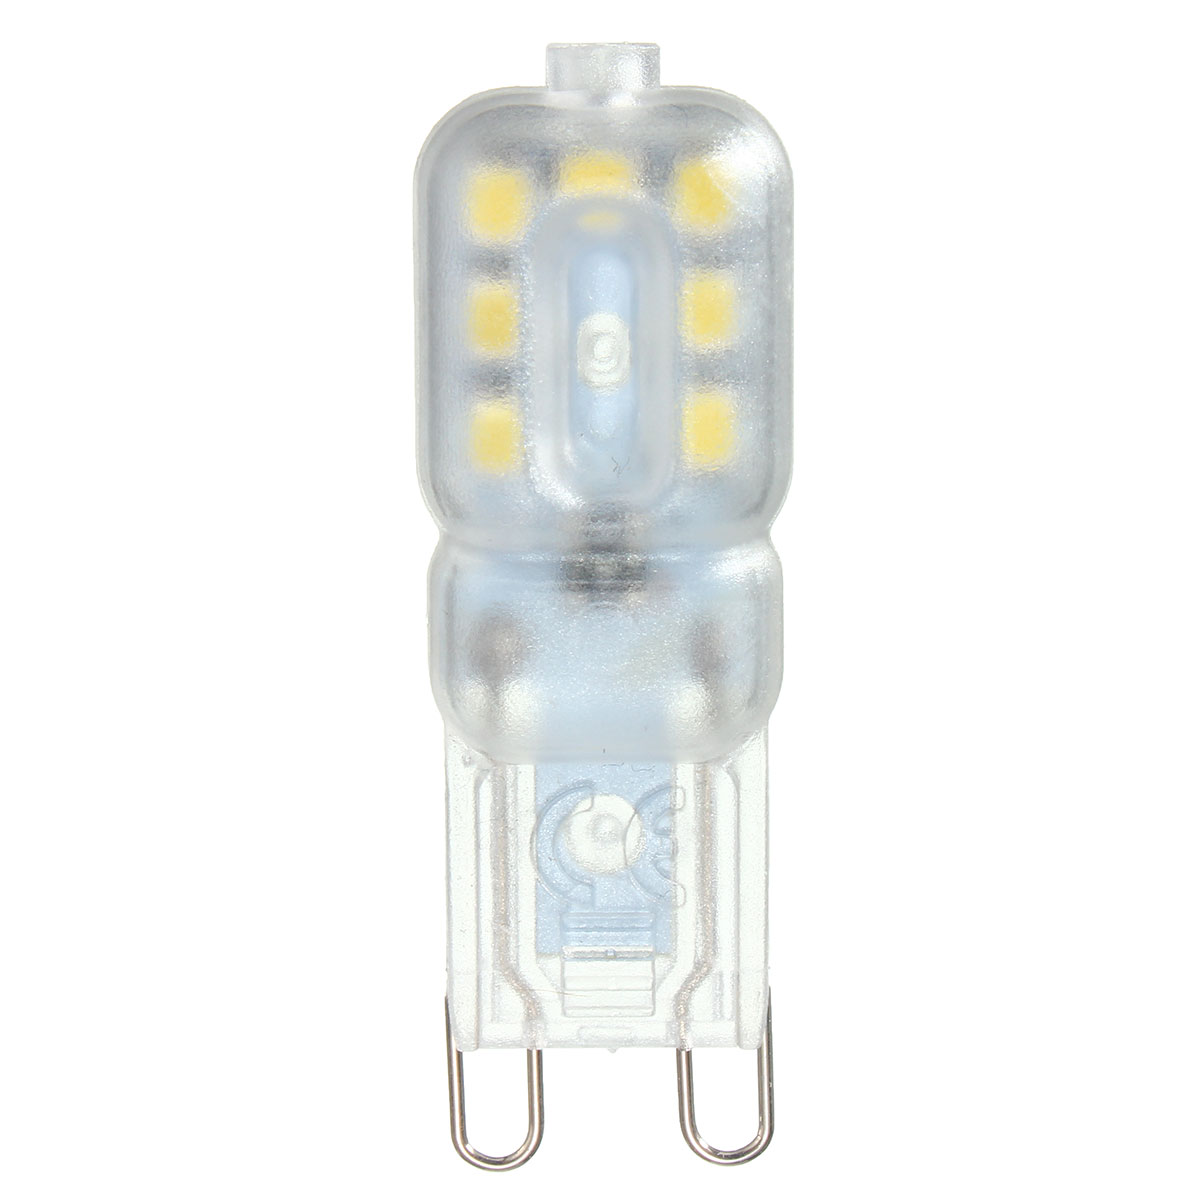 Dimmable-G9-25W-14-SMD-2835-LED-Pure-White-Warm-White-Natural-White-Light-Lamp-Bulb-AC110VAC220V-1073443-10